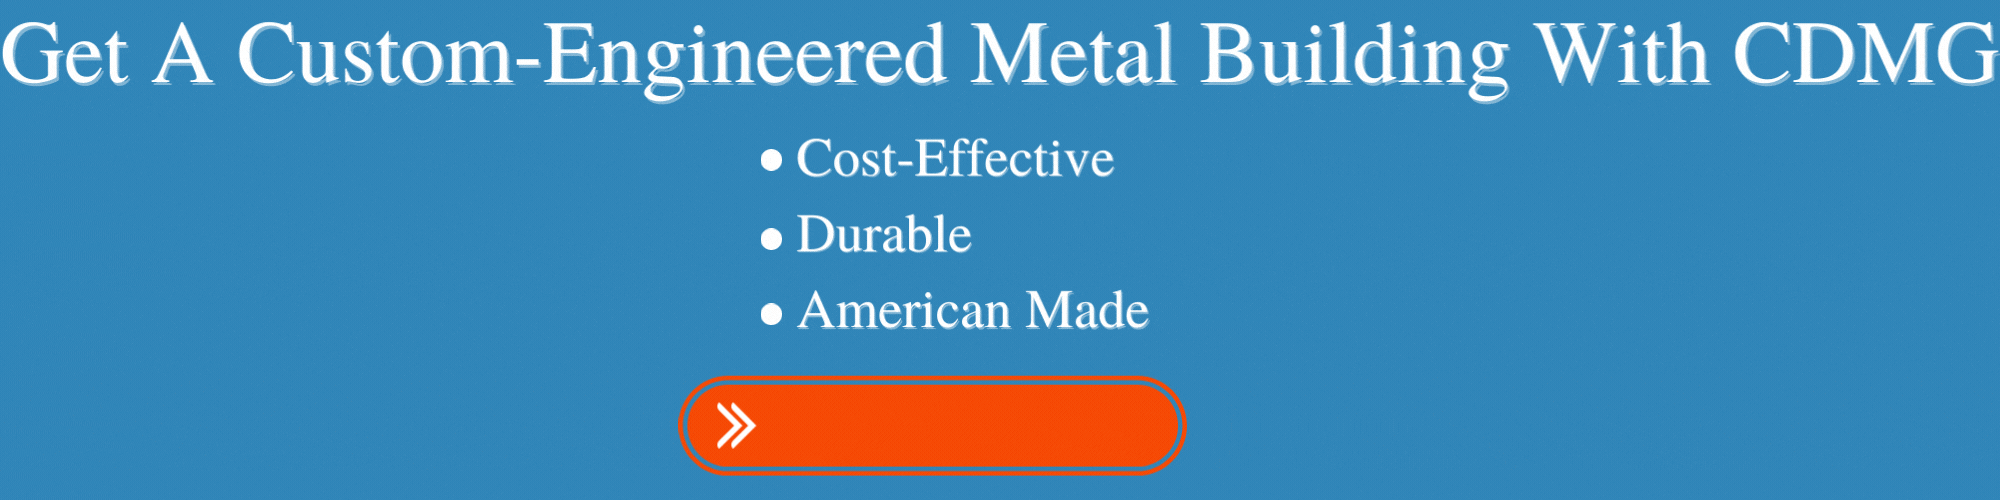 get-your-metal-building-quote-with-the-best-metal-building-company